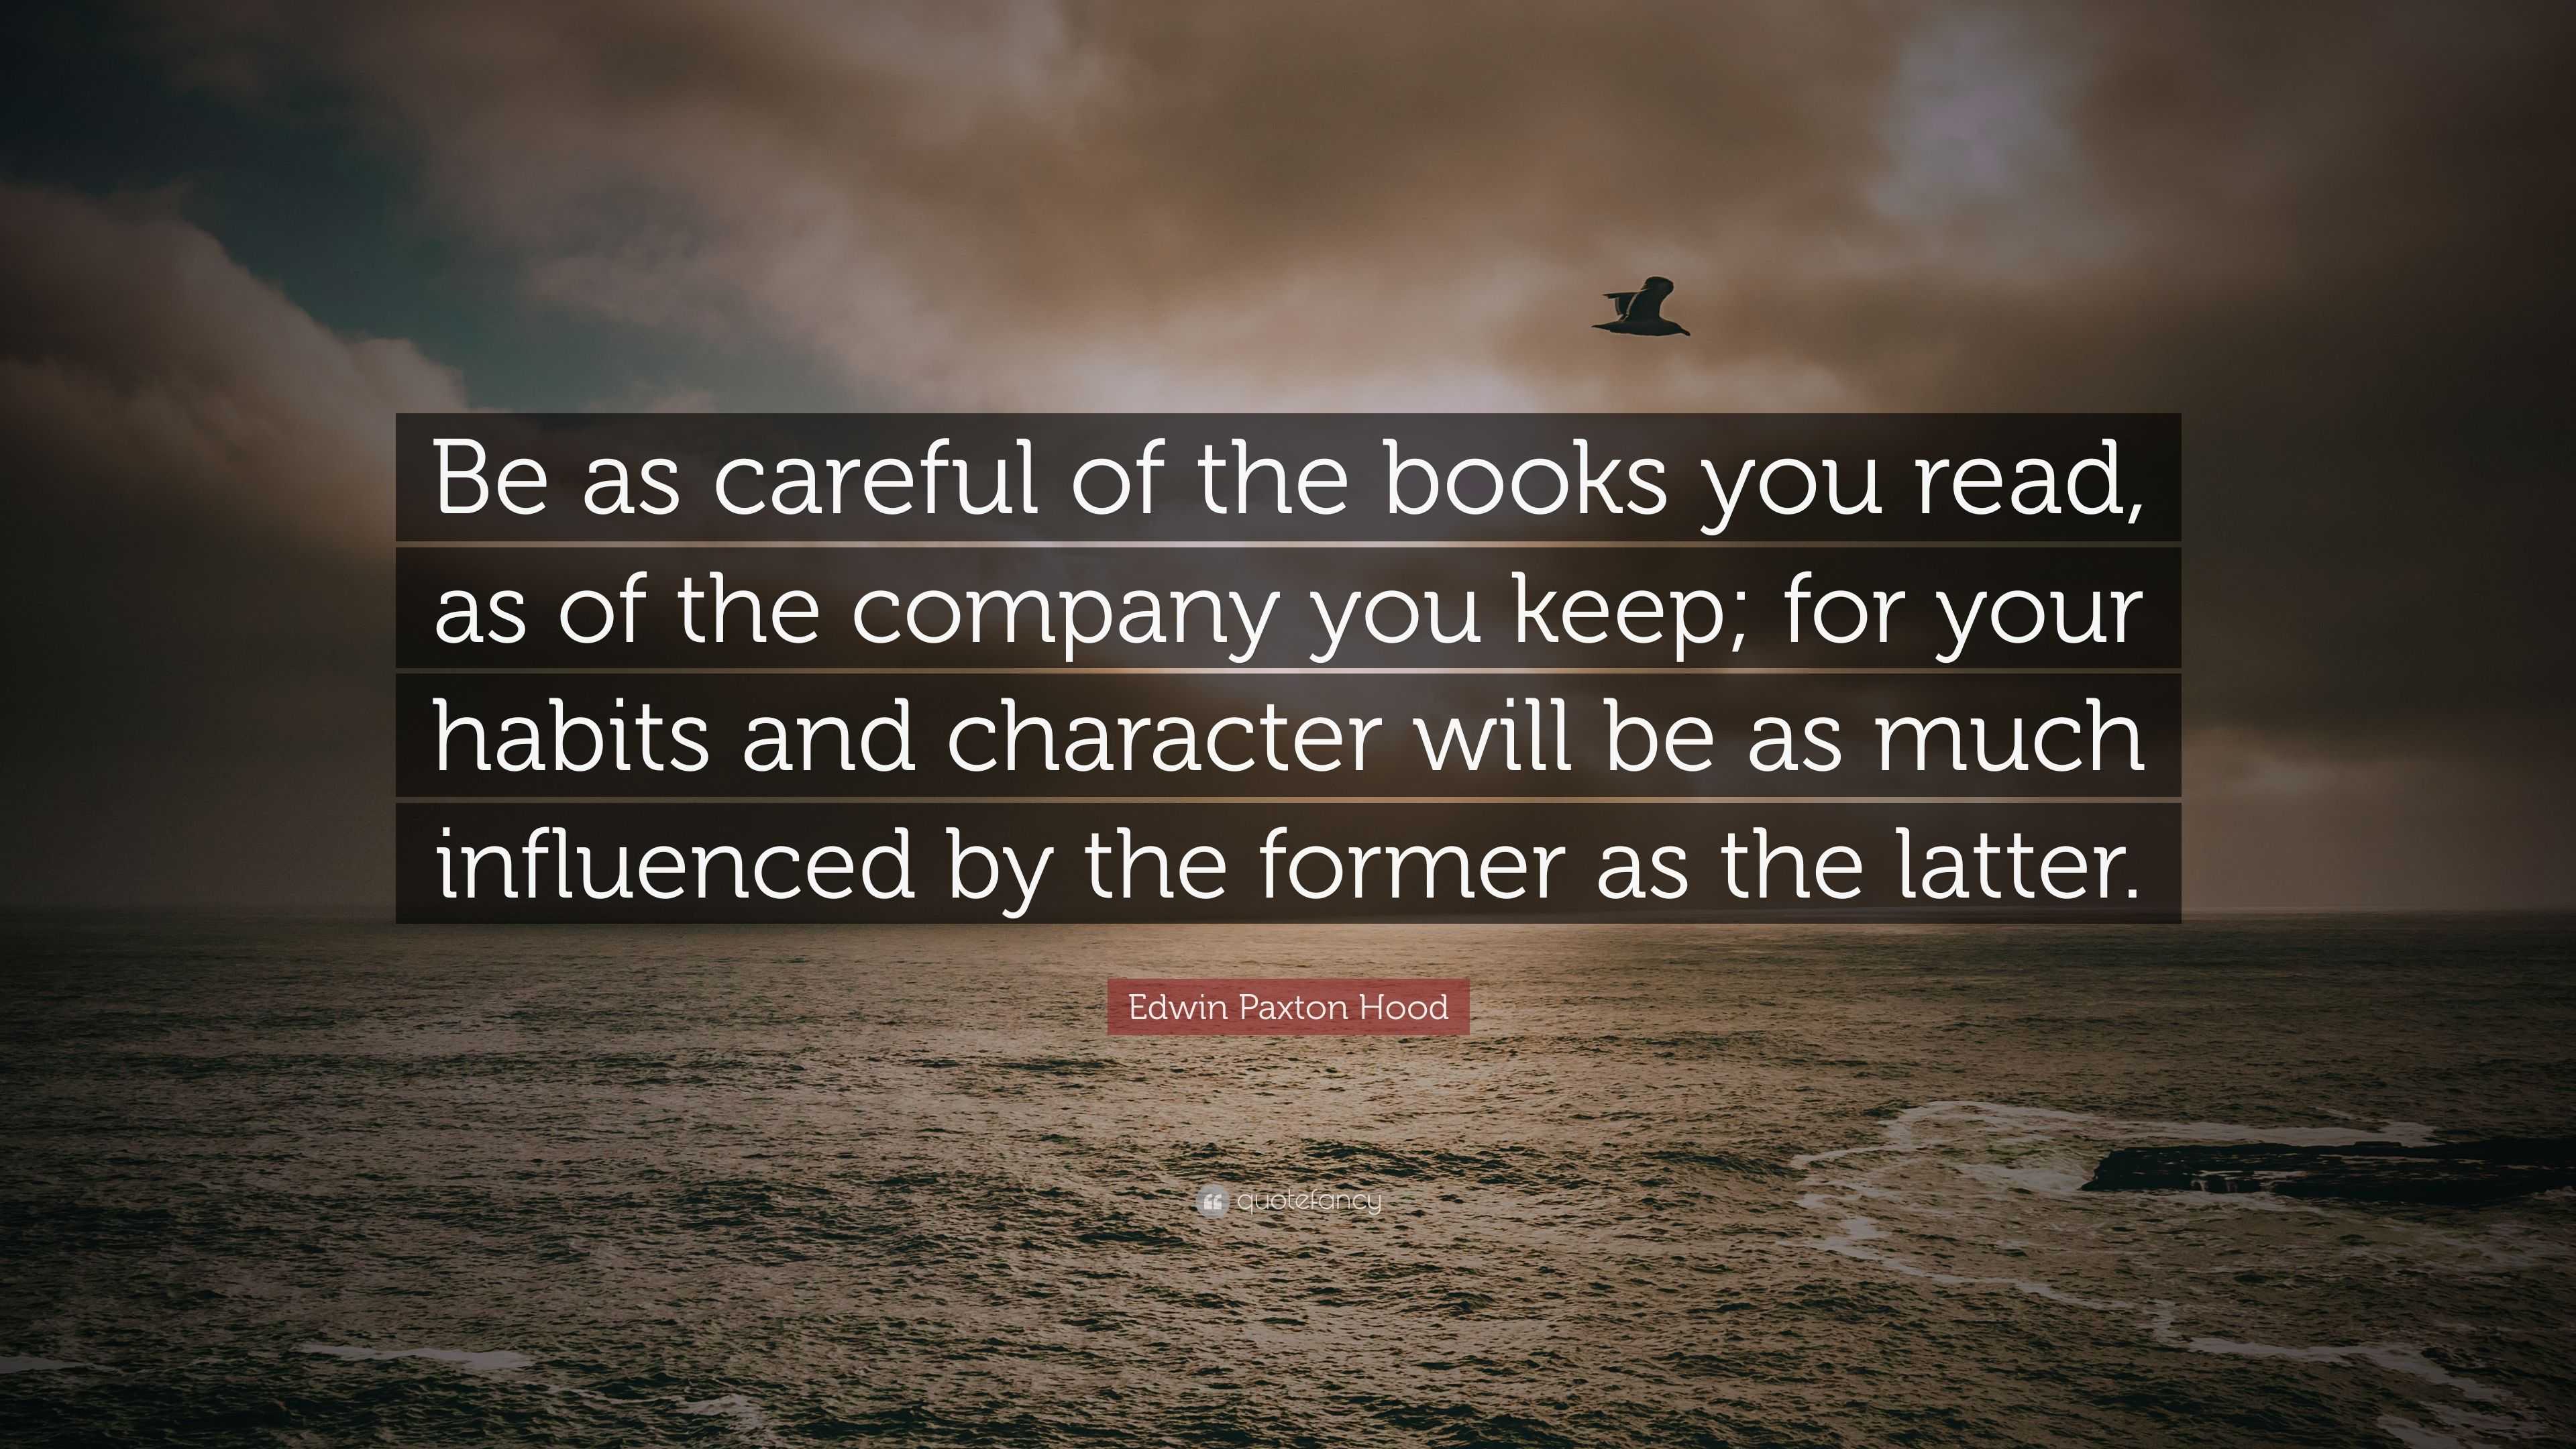 Edwin Paxton Hood Quote: “Be as careful of the books you read, as of ...